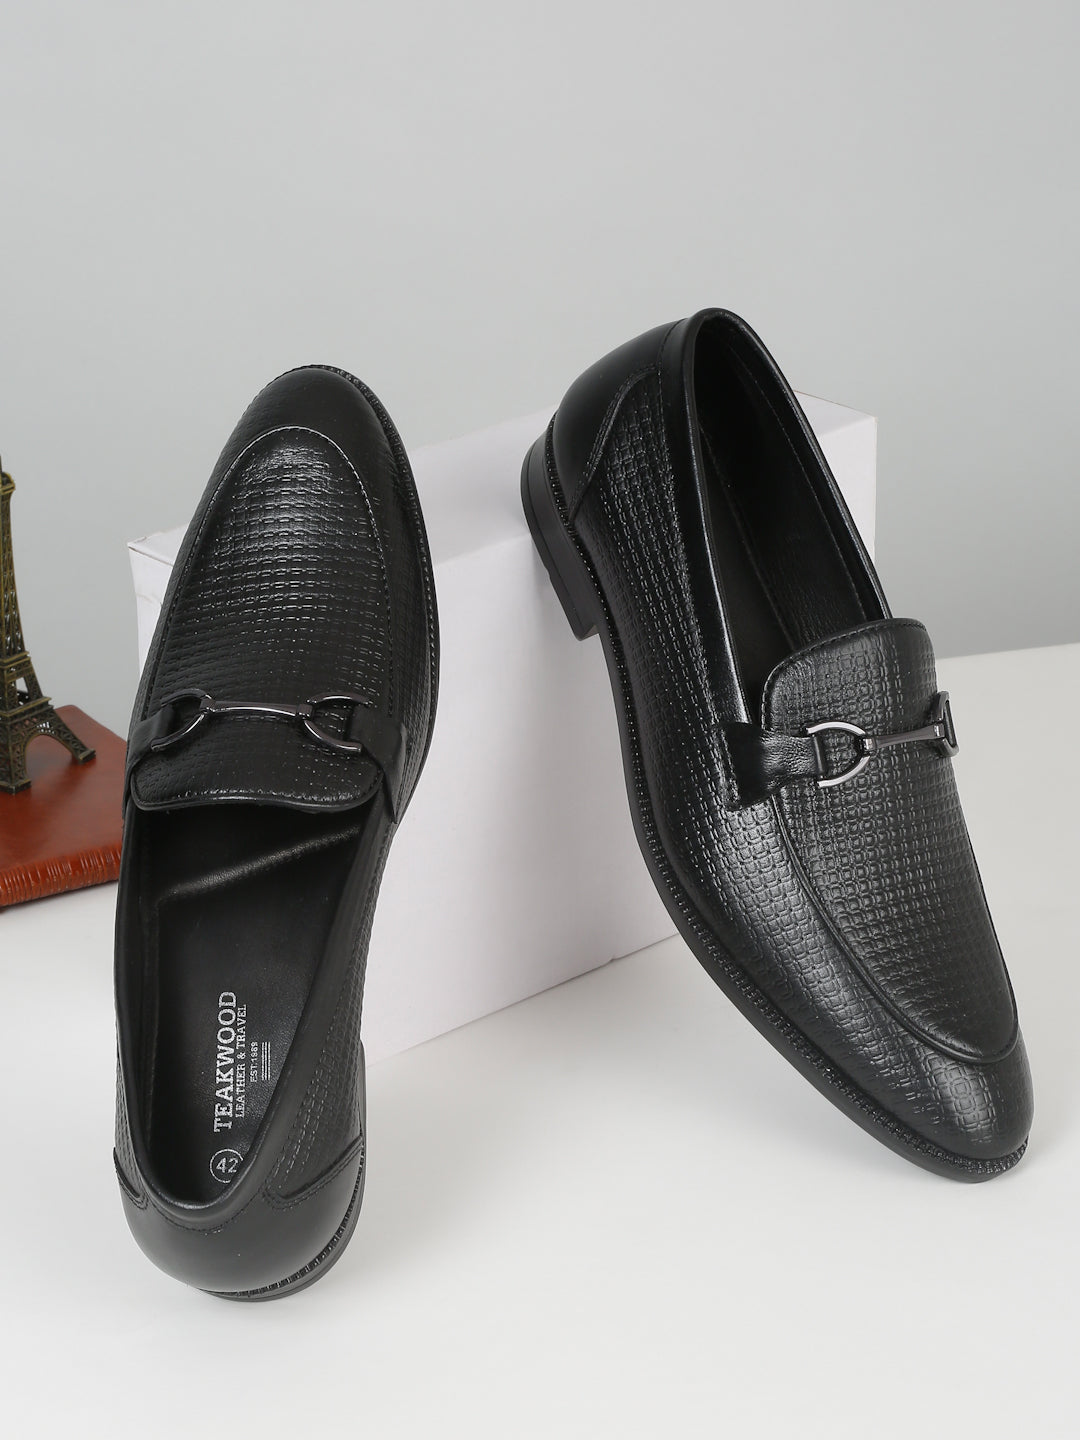 Men's Black Patterned Leather Moccasins with buckle – Teakwood Leathers